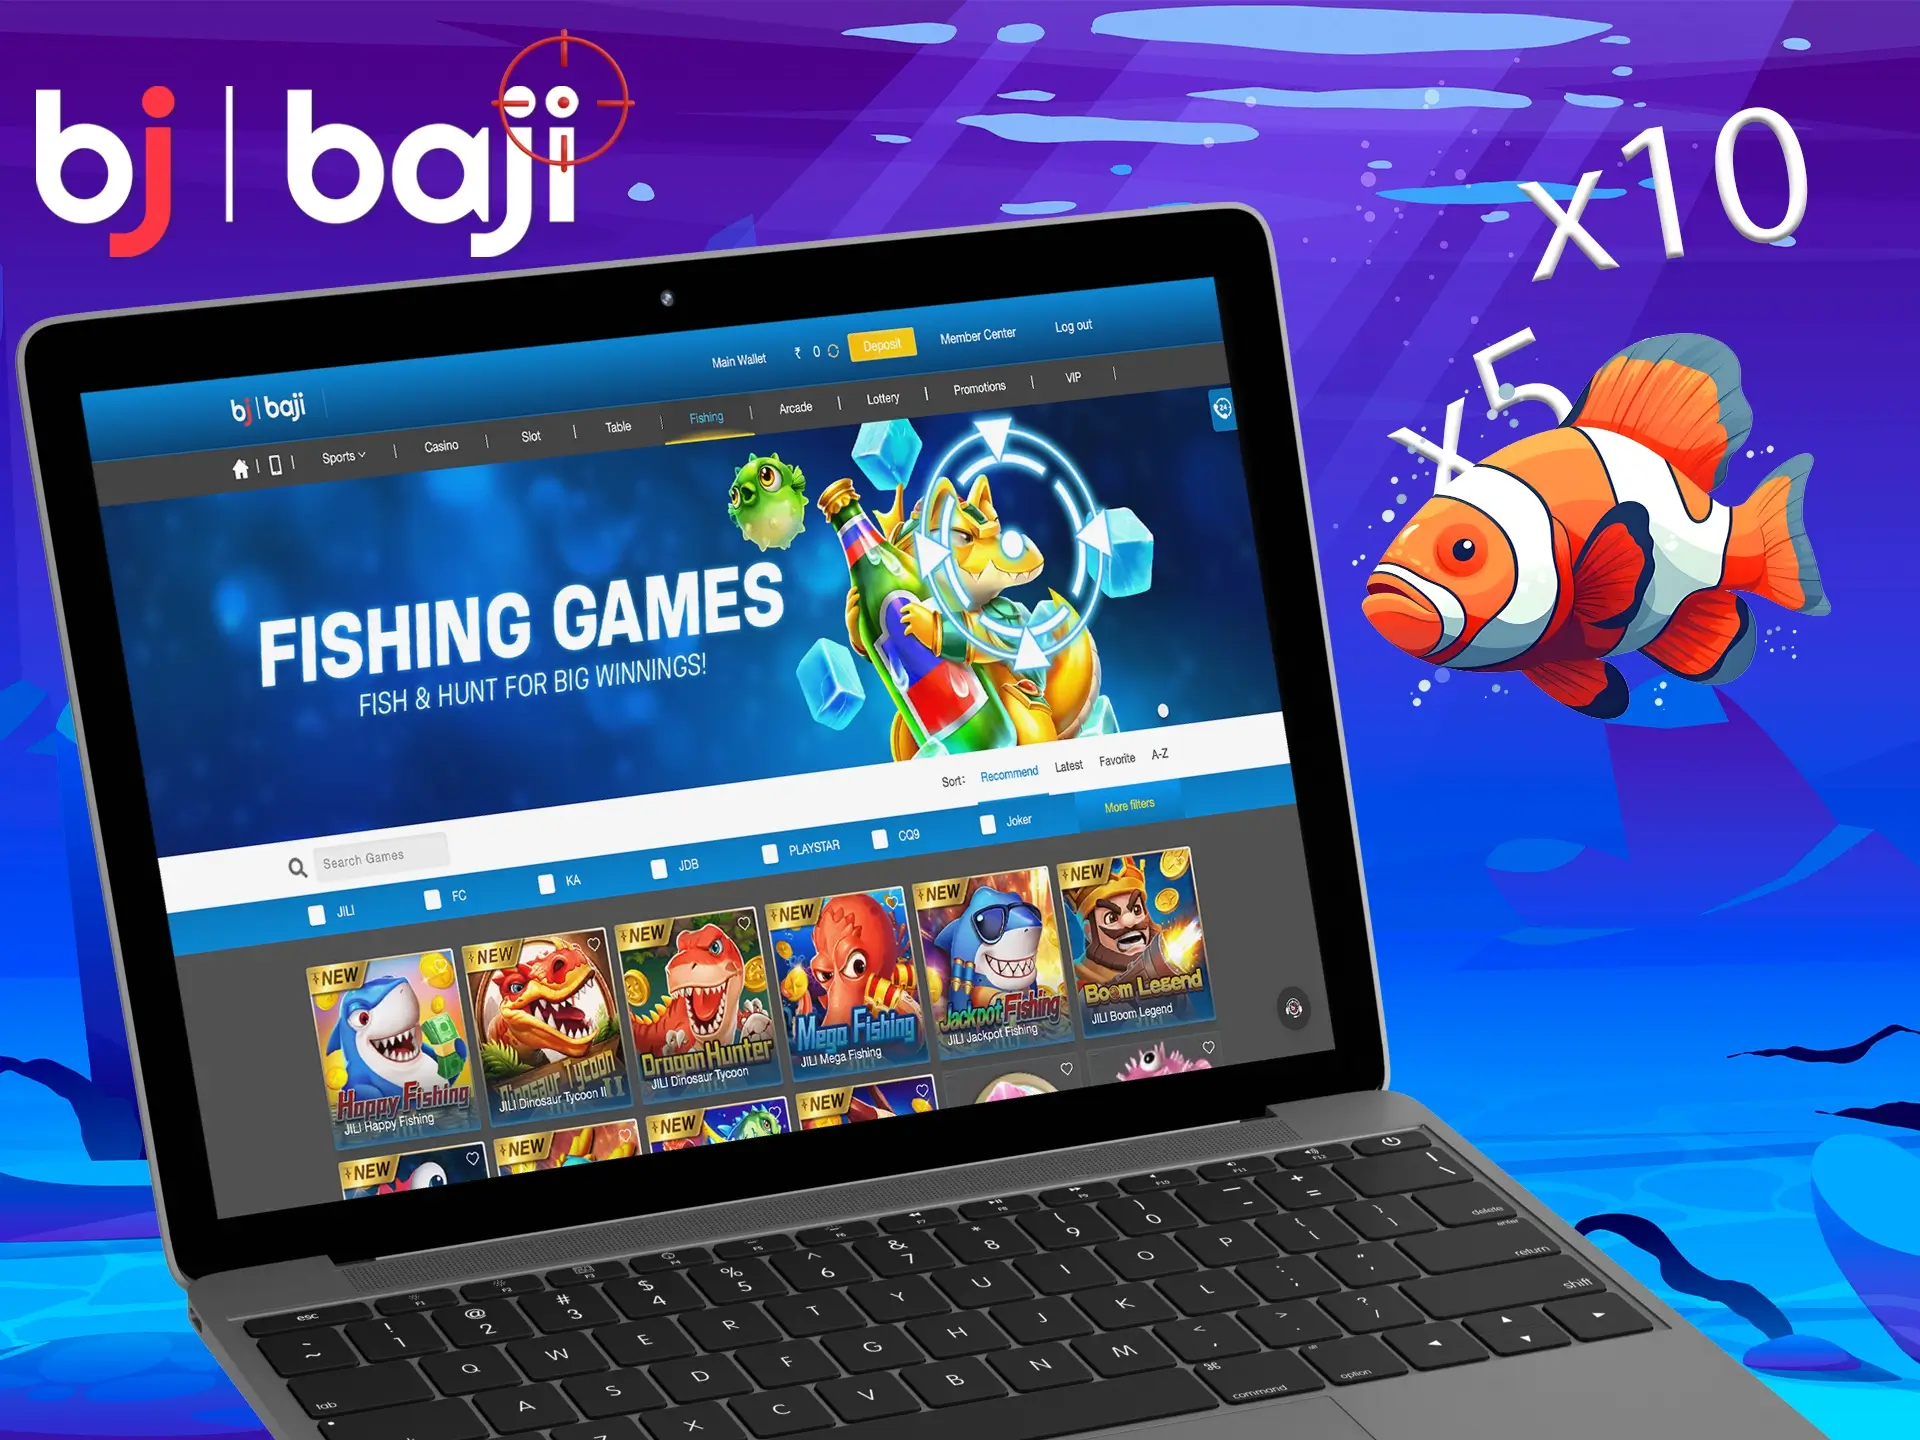 Winning in Baji fish games directly depends on your actions and choosing the right decisions.